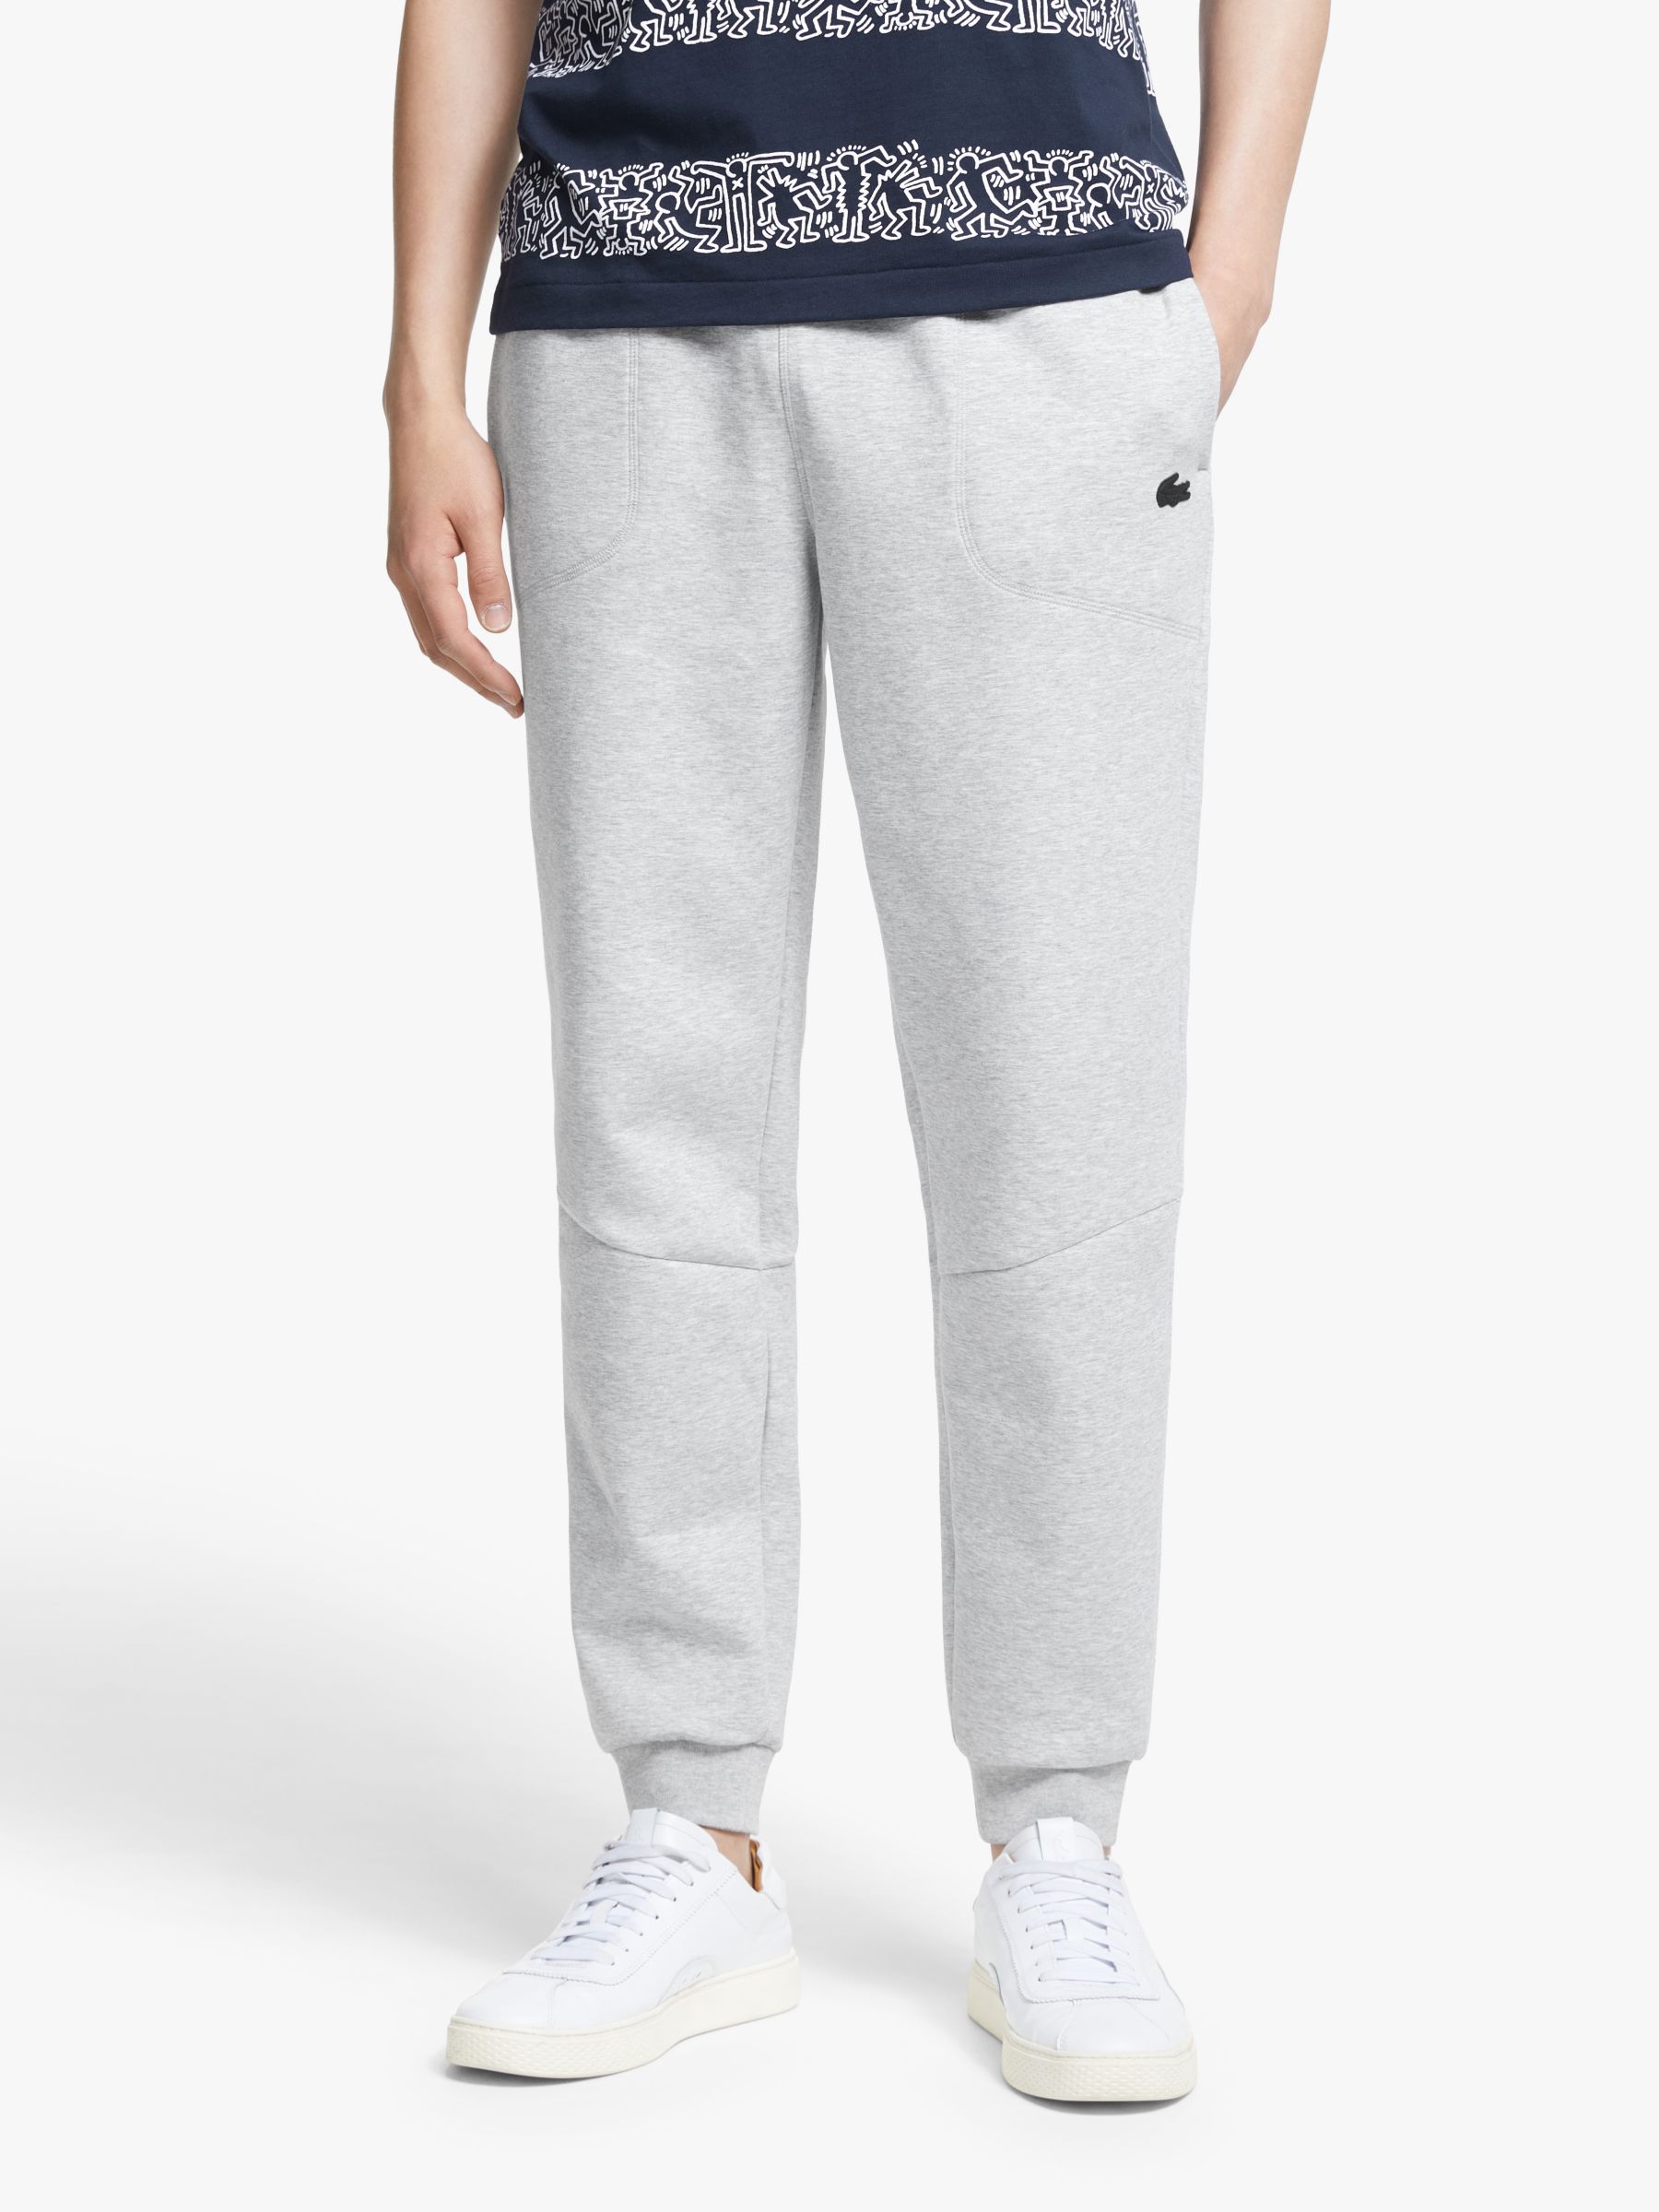 lacoste tracksuit bottoms grey